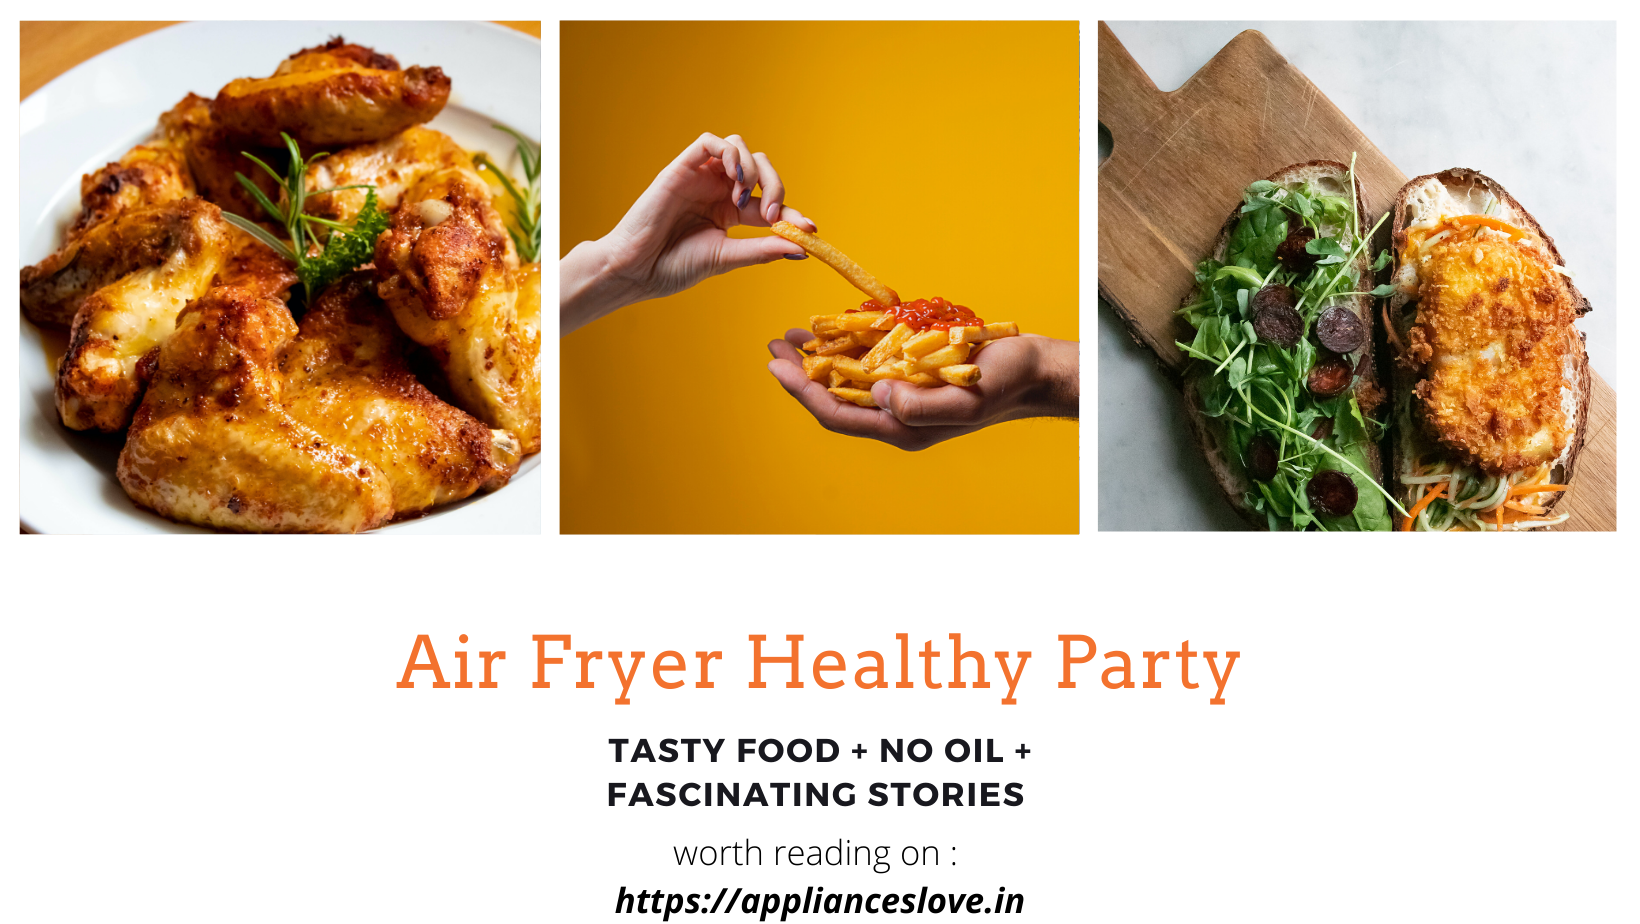 https://applianceslove.in/wp-content/uploads/2021/04/How-does-an-airfryer-works.png